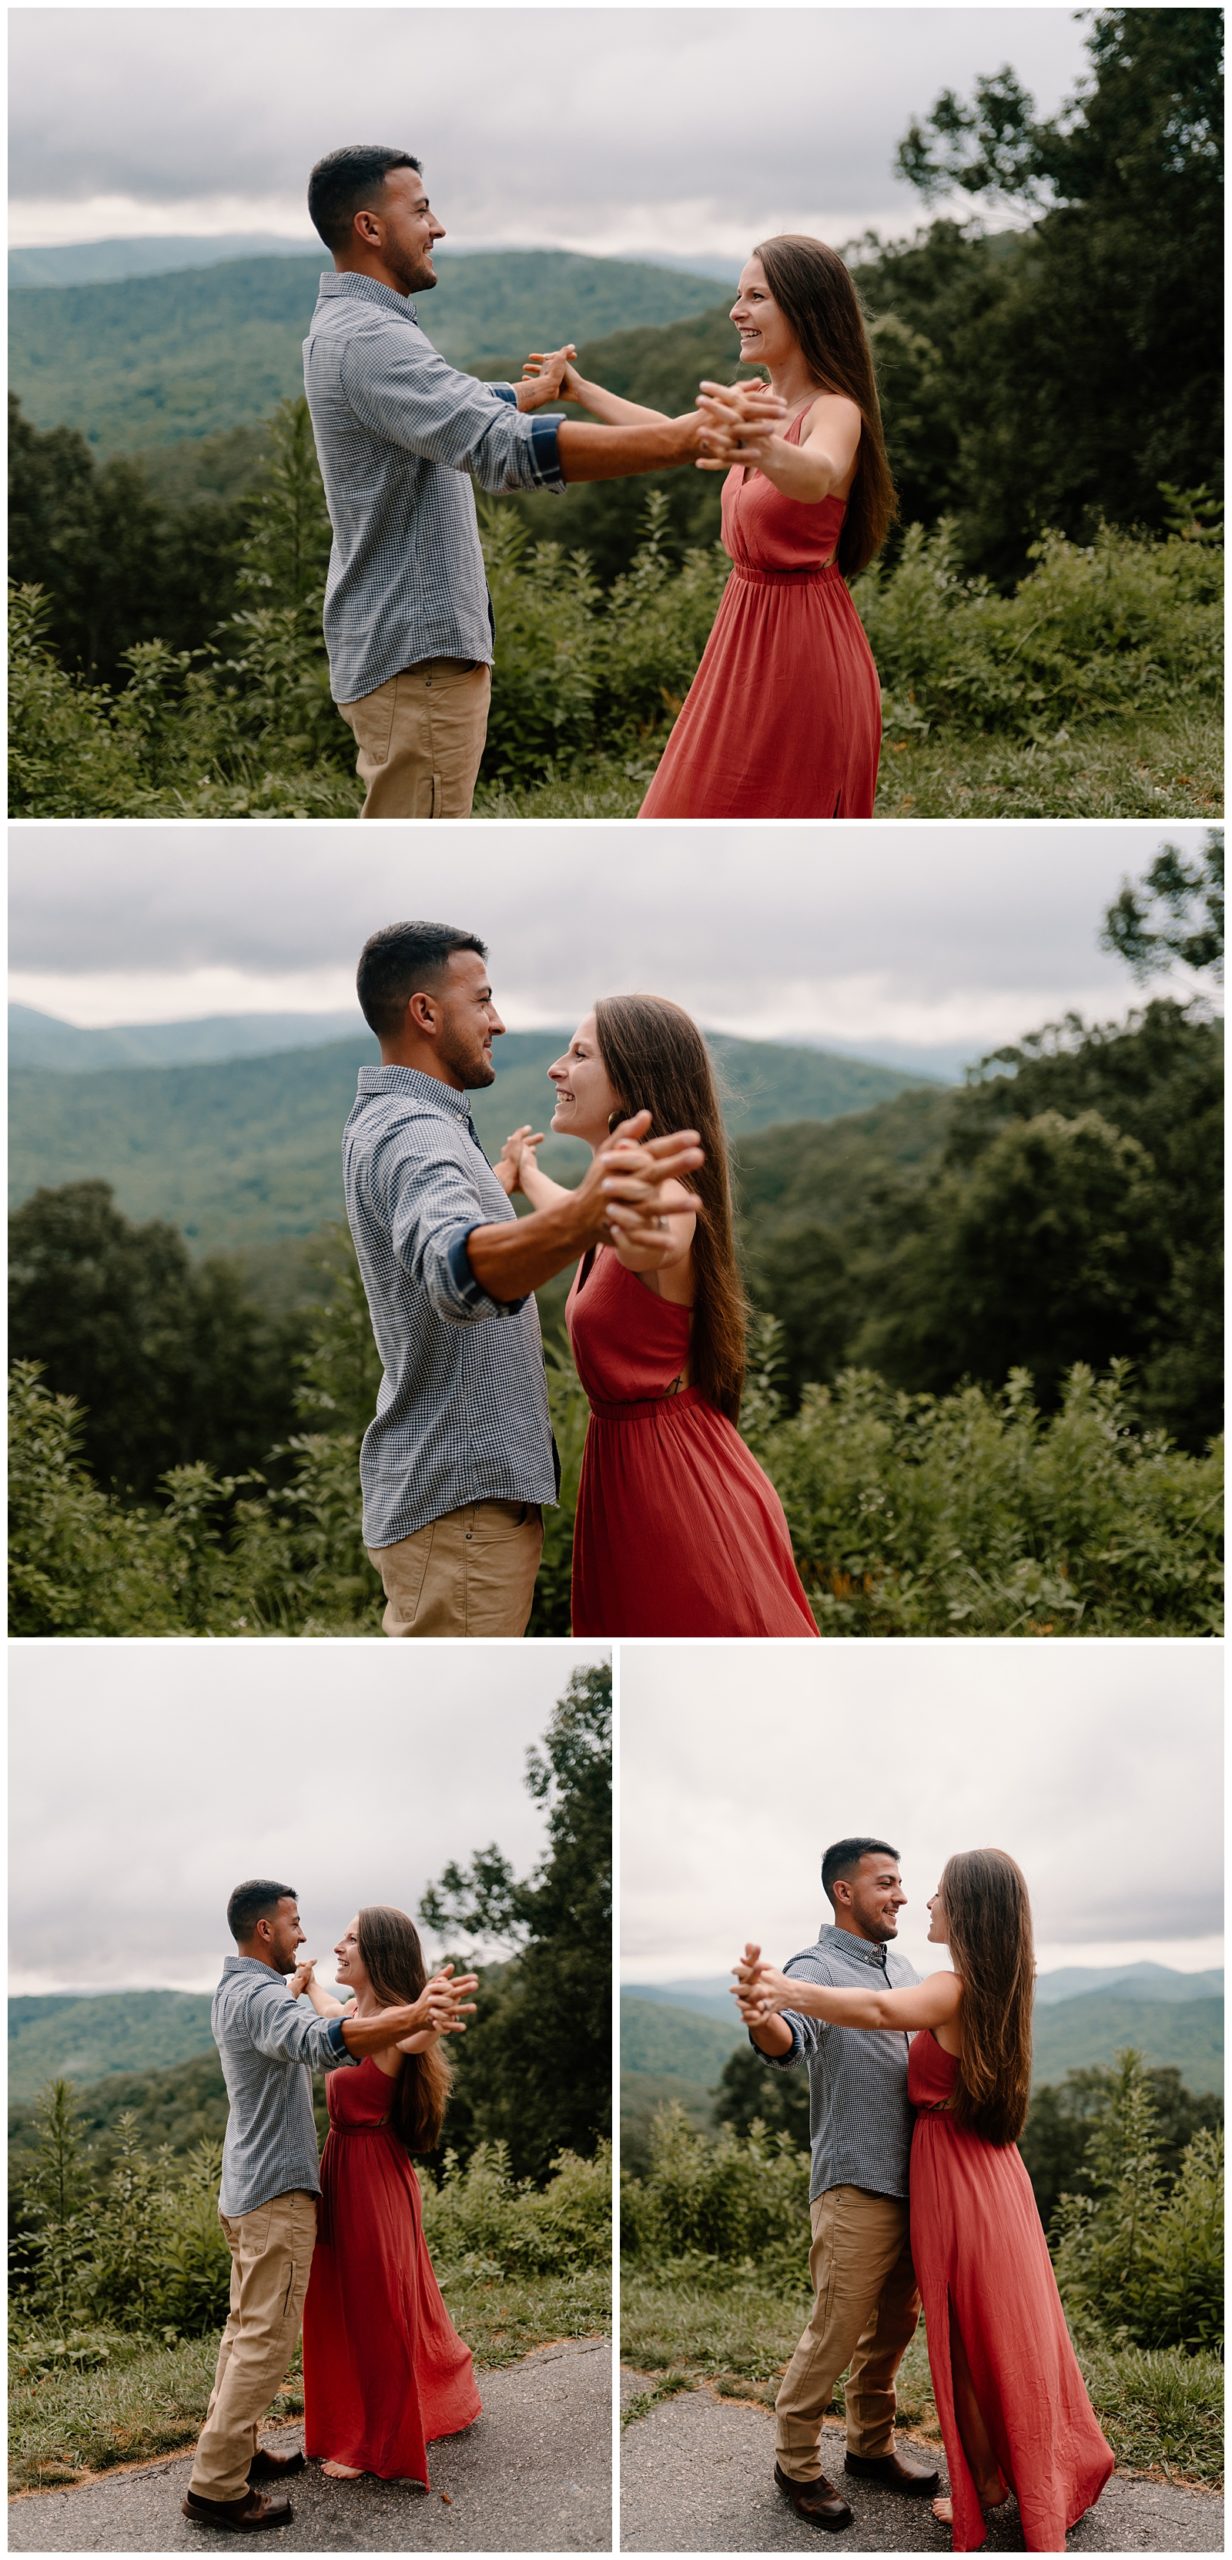 Fun engagement session photos in the Asheville area mountains